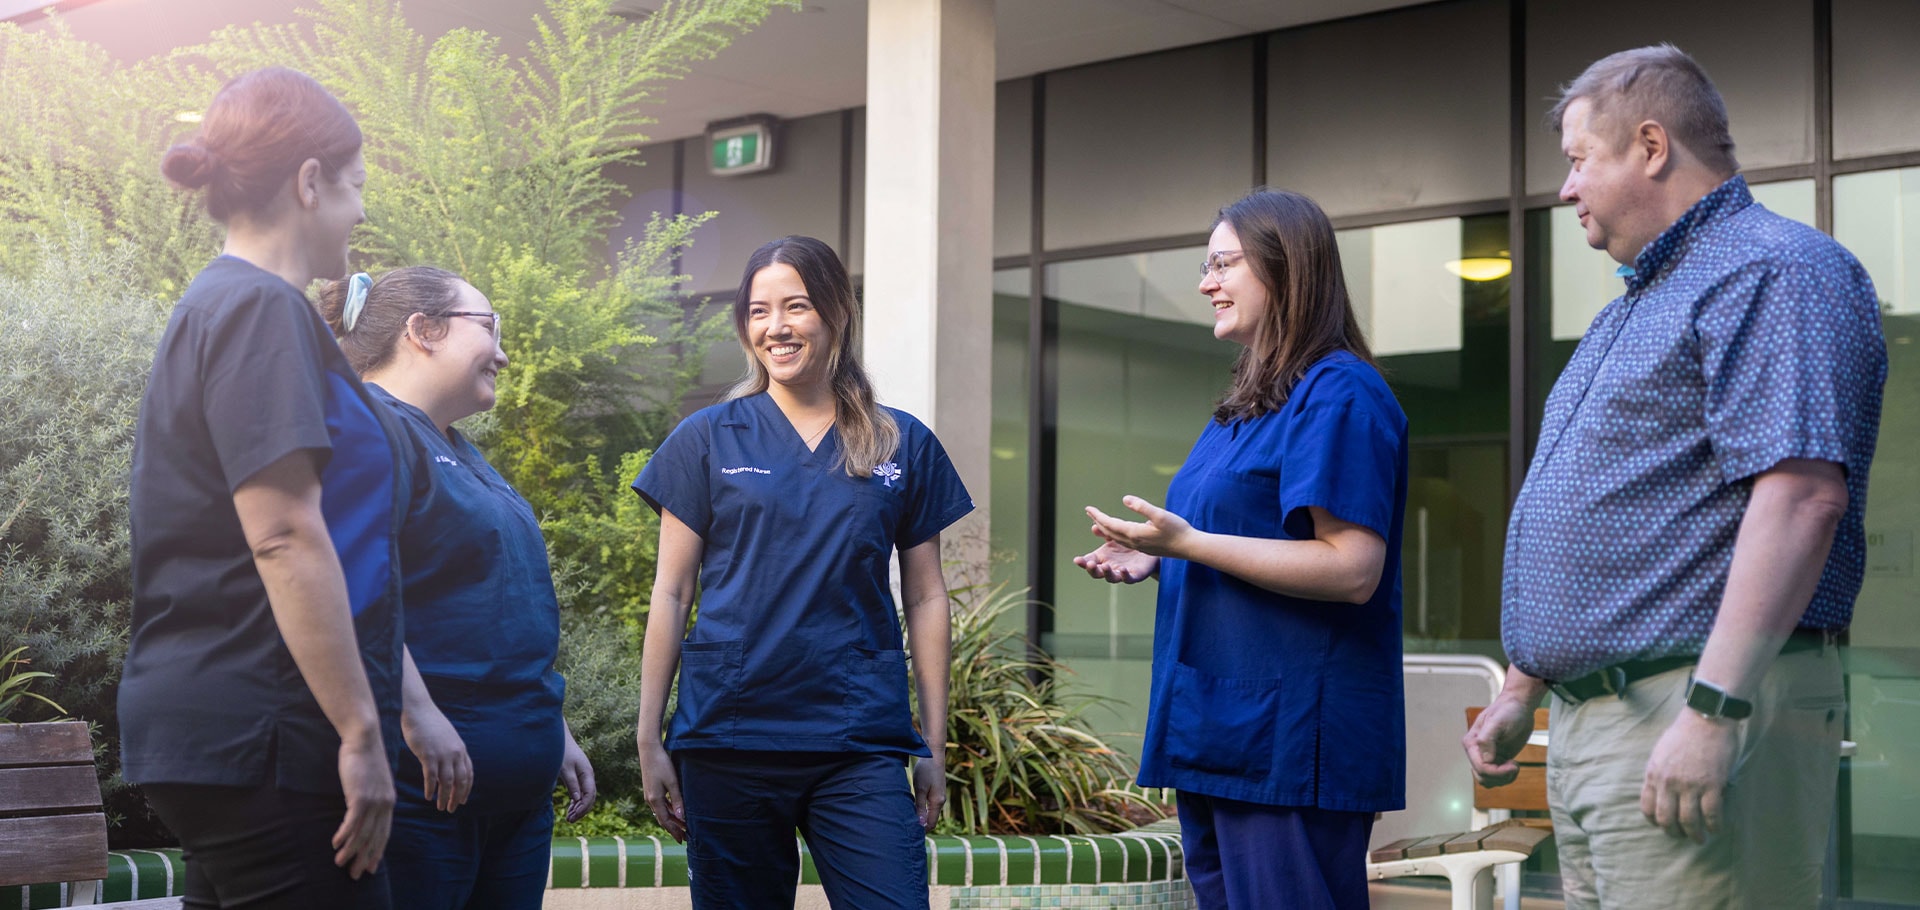 Candid image of a group of caregivers with some dressed in scrubs and others in business wear, standing outside conversing and smiling.